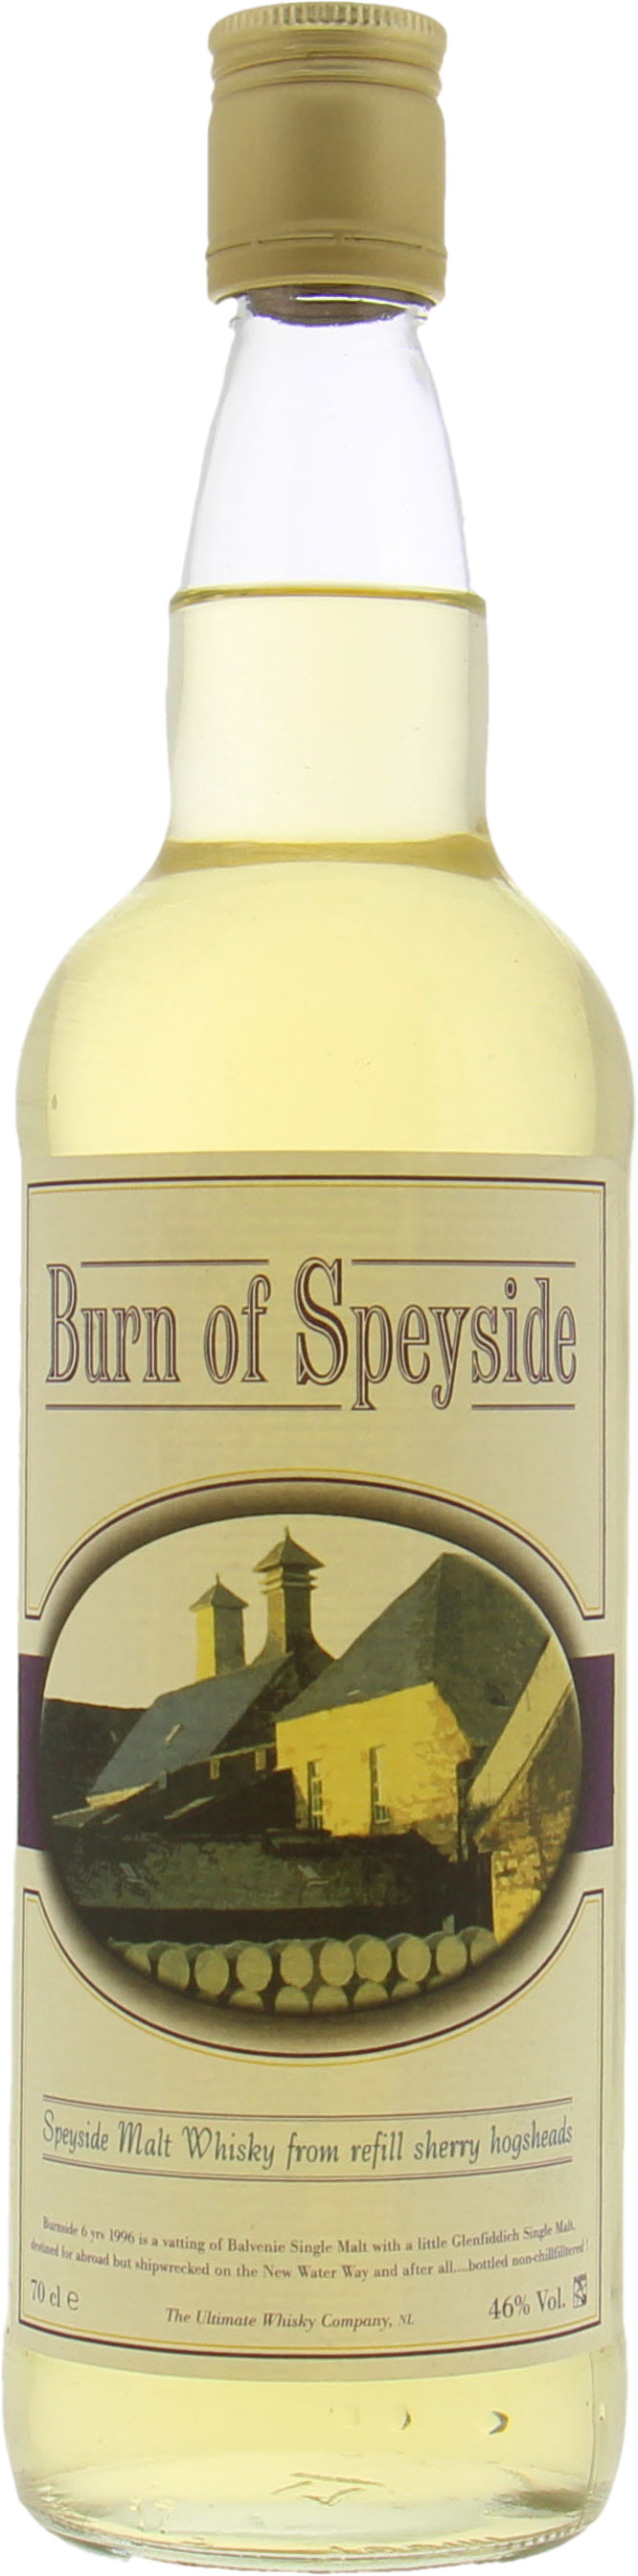 The Ultimate Whisky Company - Burn of Speyside 6 Years Old 46% 1996 Perfect